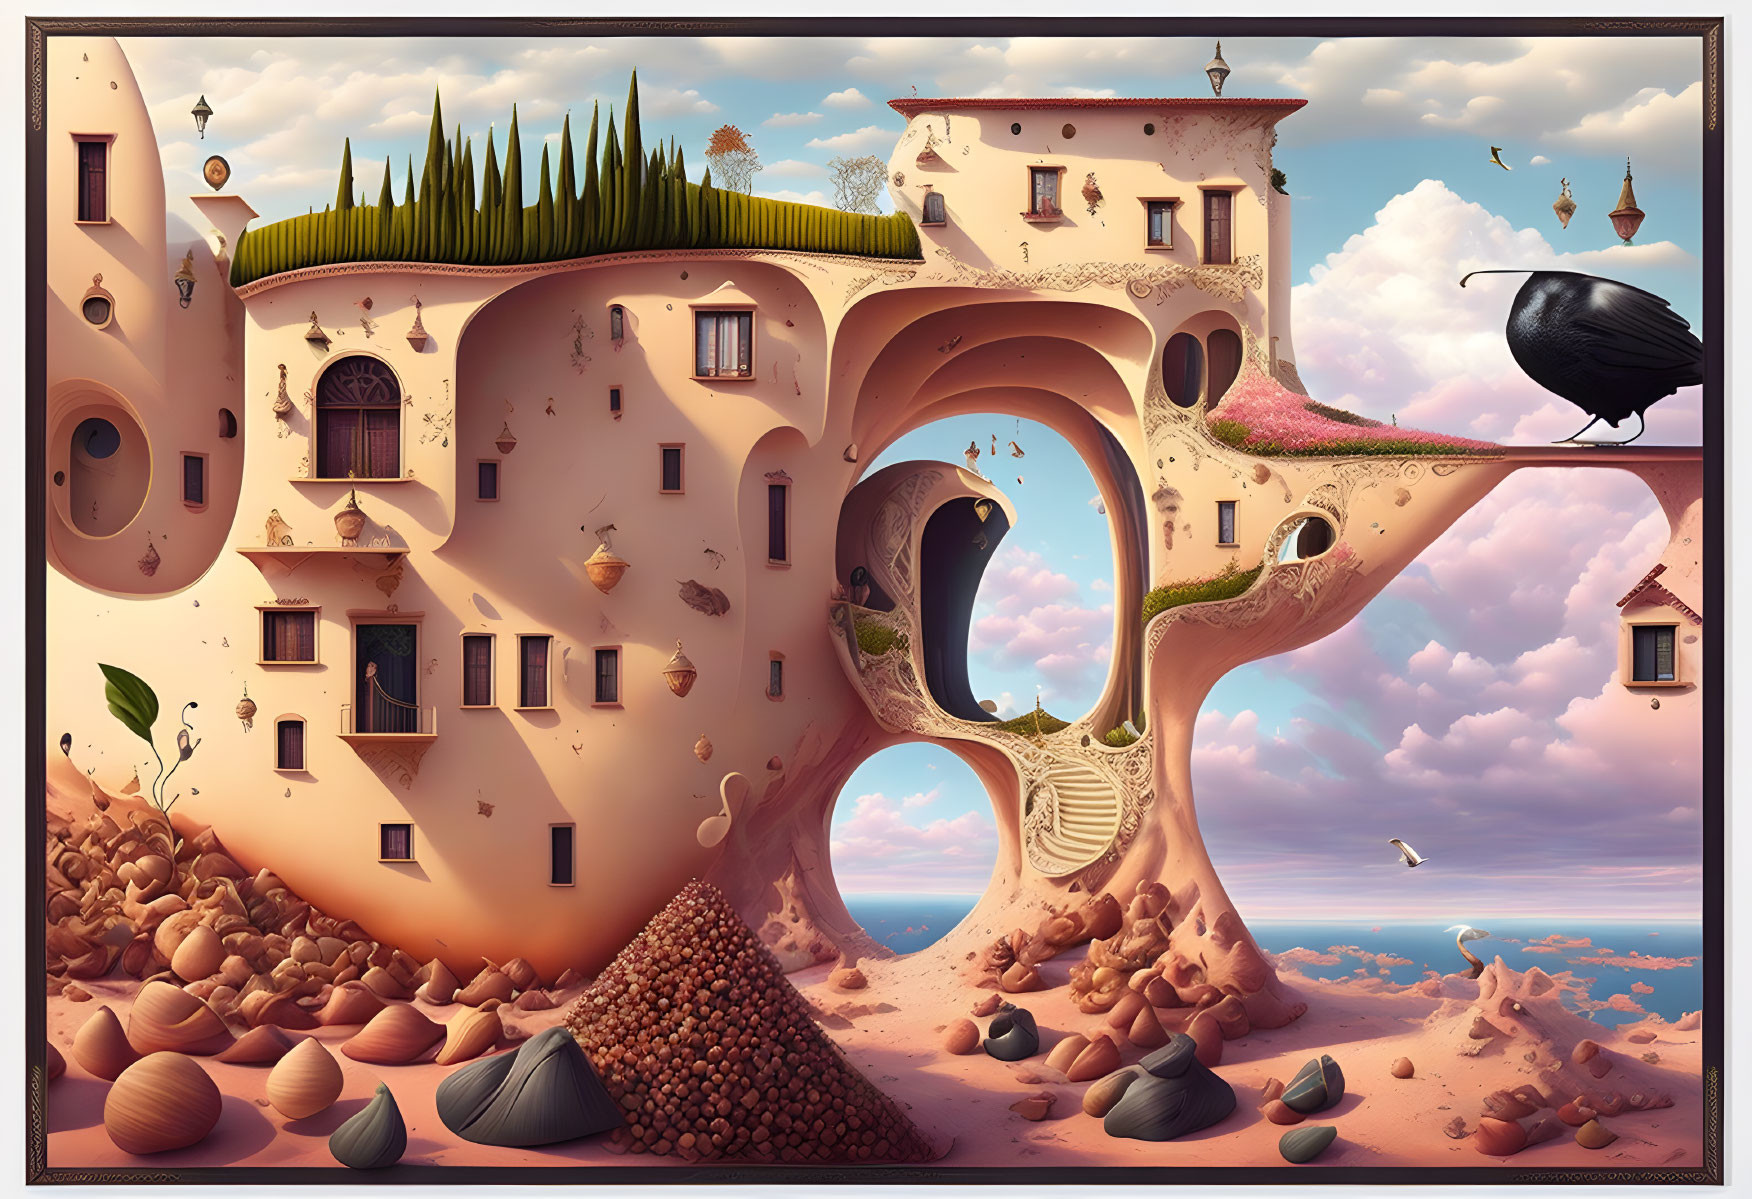 Whimsical tree-like building in surreal landscape with black bird and pink clouds